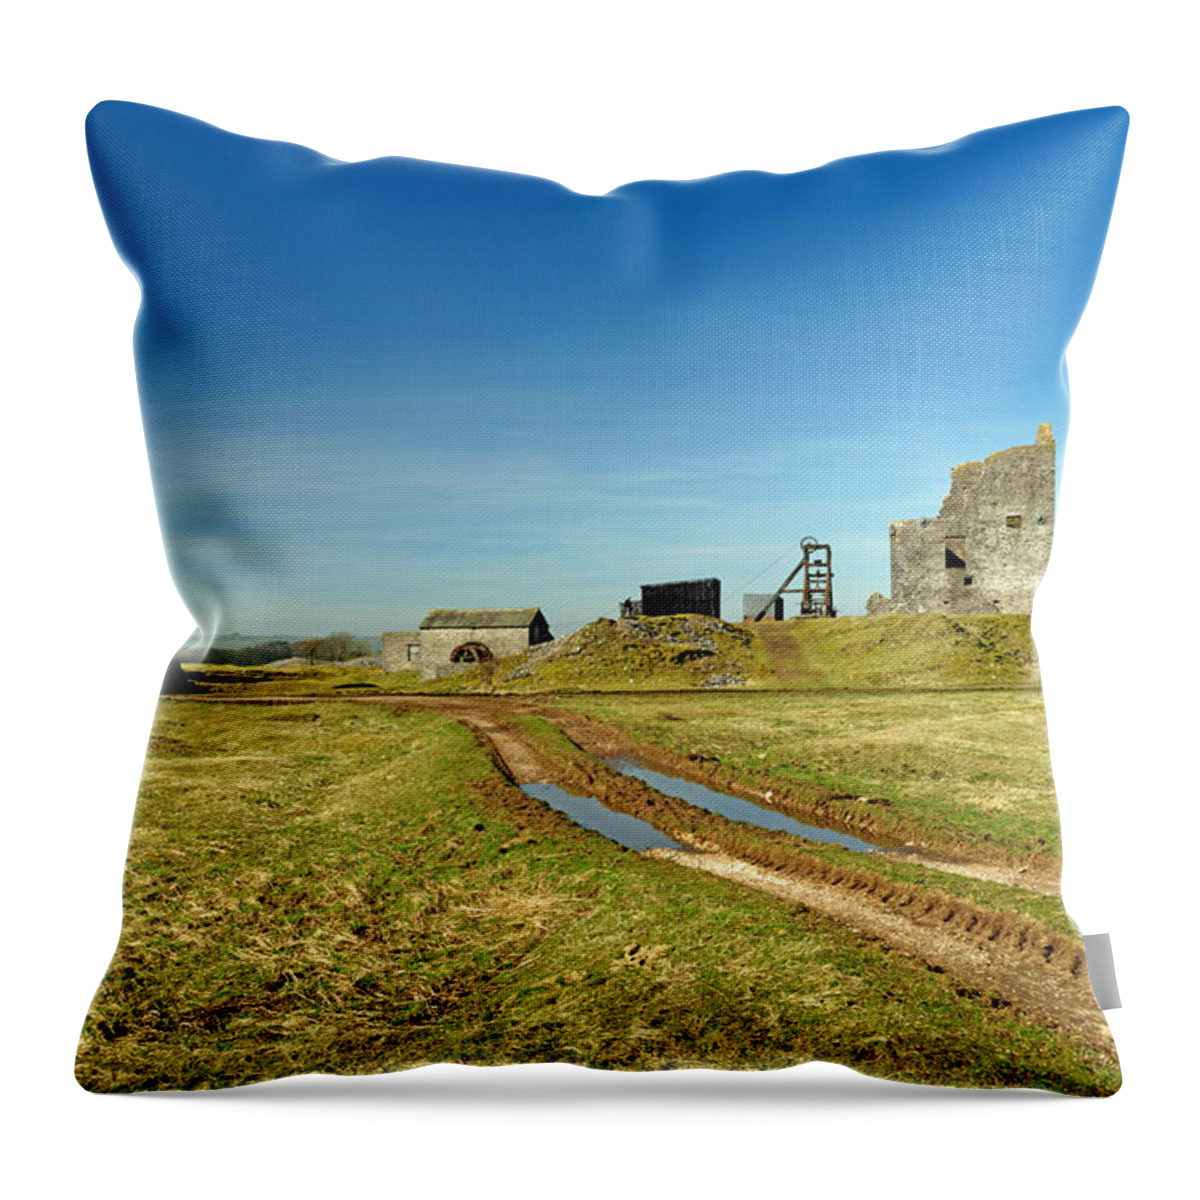 Britain Throw Pillow featuring the photograph The Magpie Mine Site - Sheldon by Rod Johnson